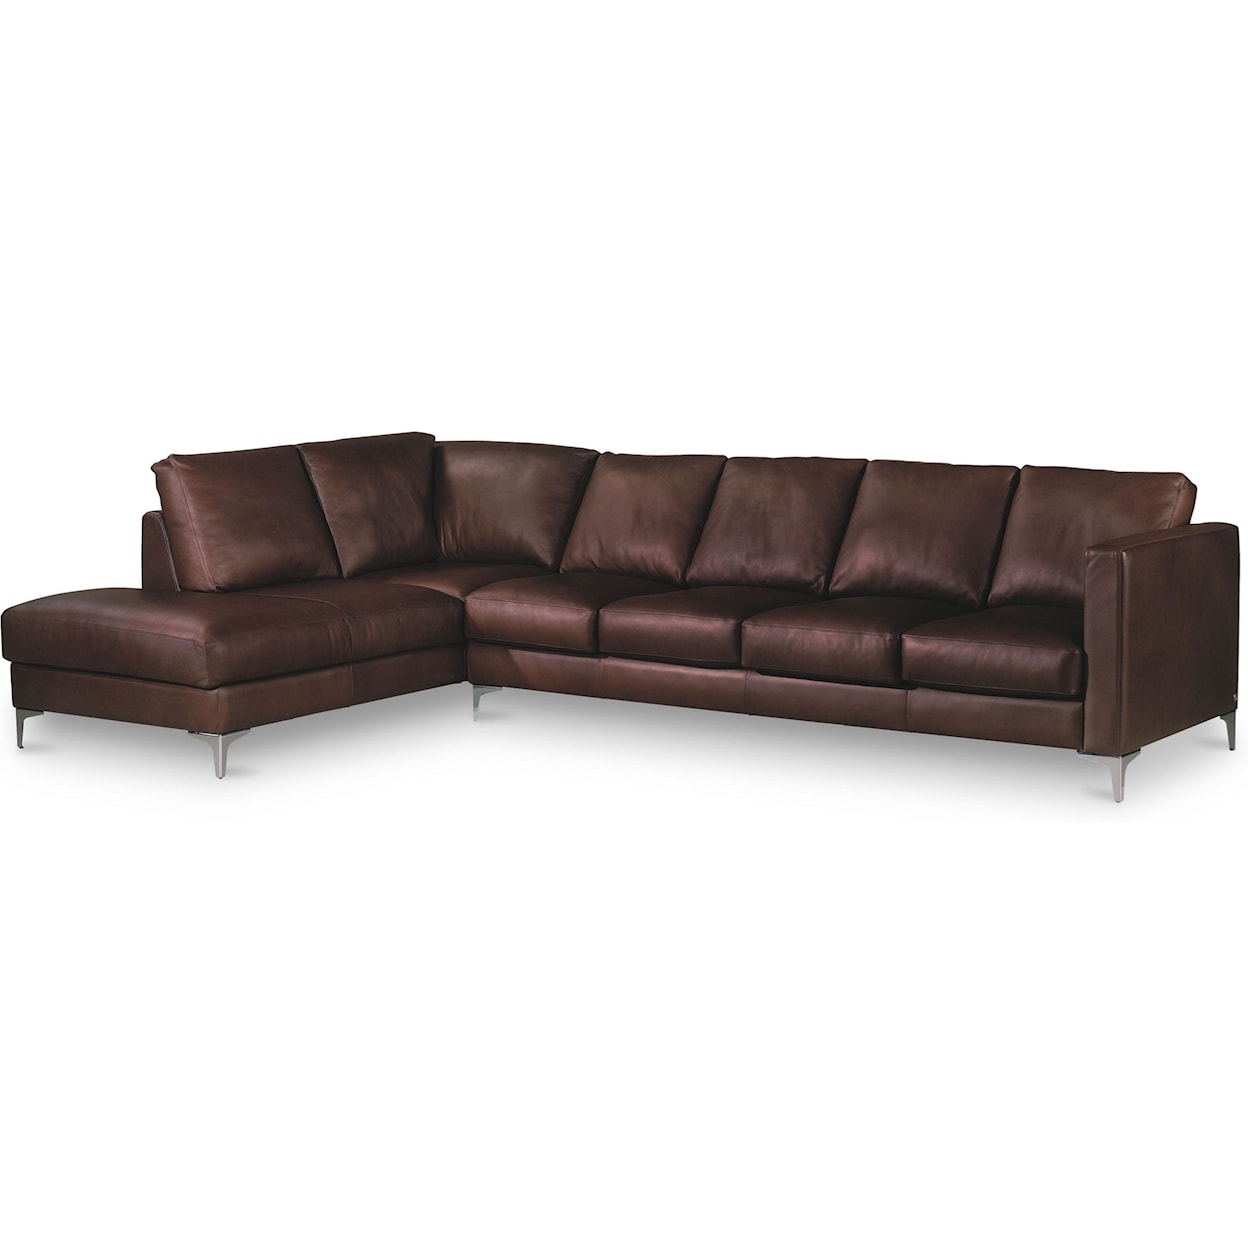 American Leather Kendall 5-Seat Sectional w/ Right Arm Sitting Chaise